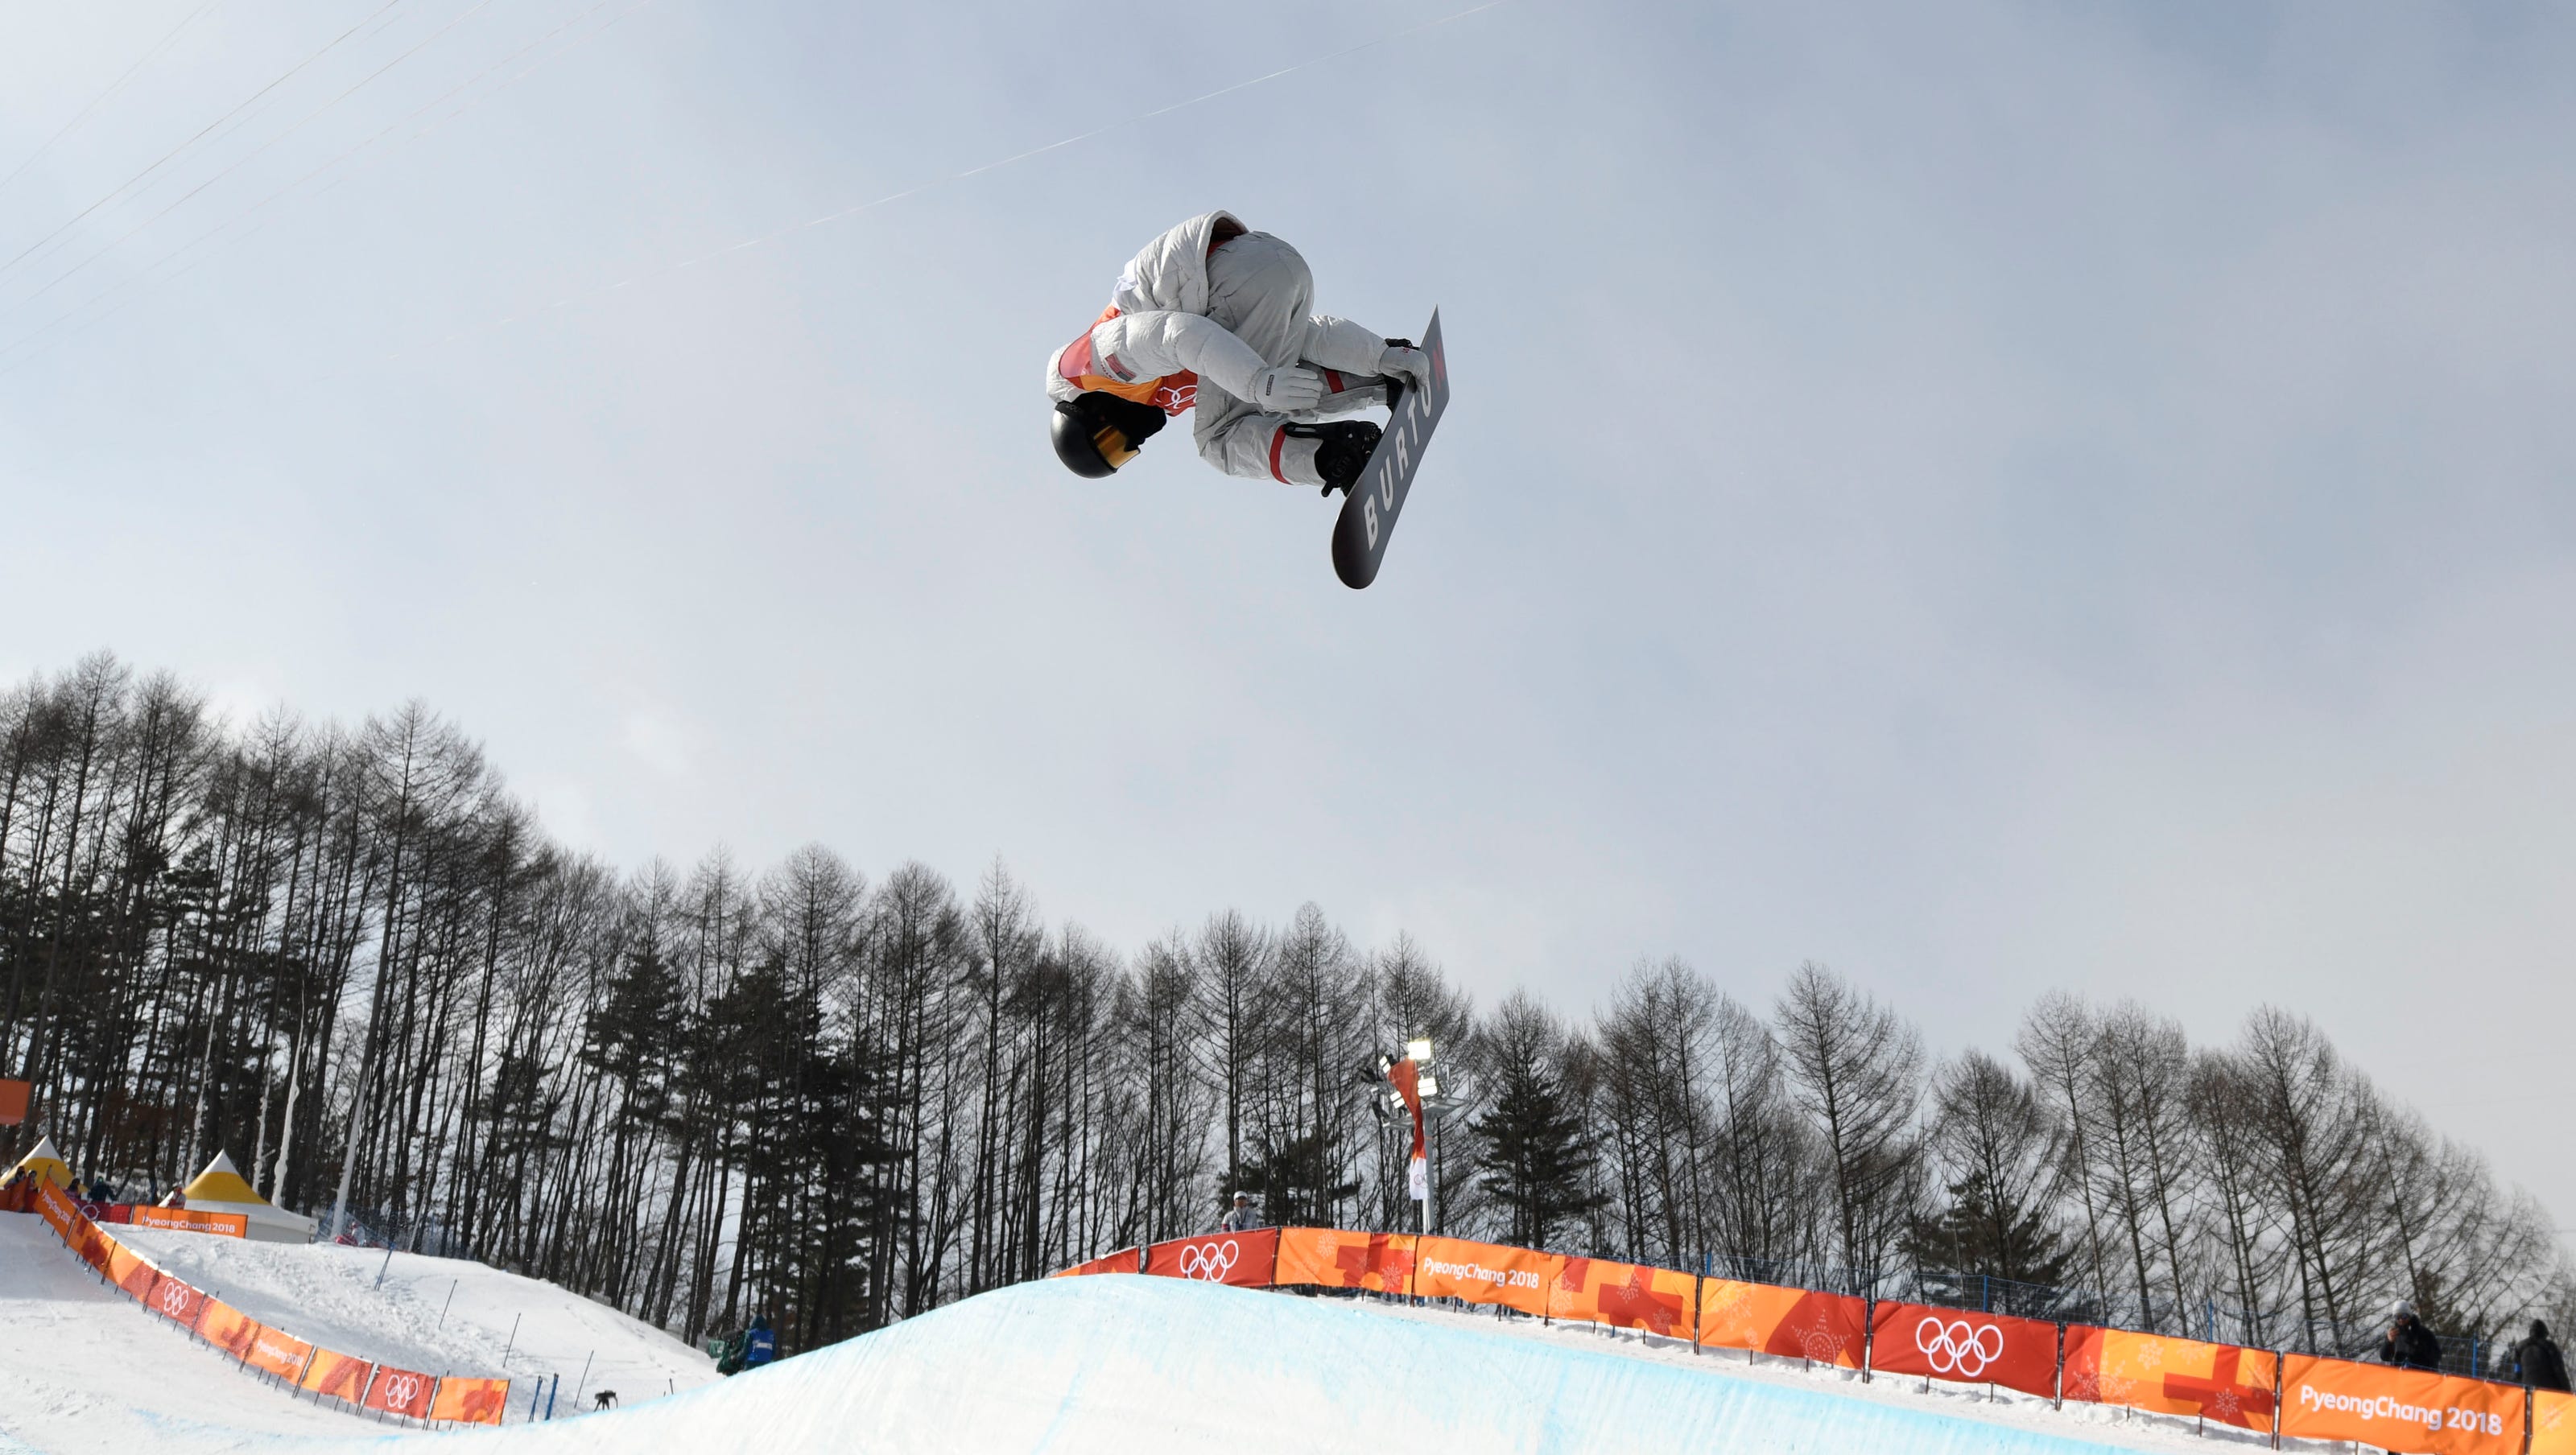 2018 Winter Olympics: Shaun White soars, and it was only qualifying